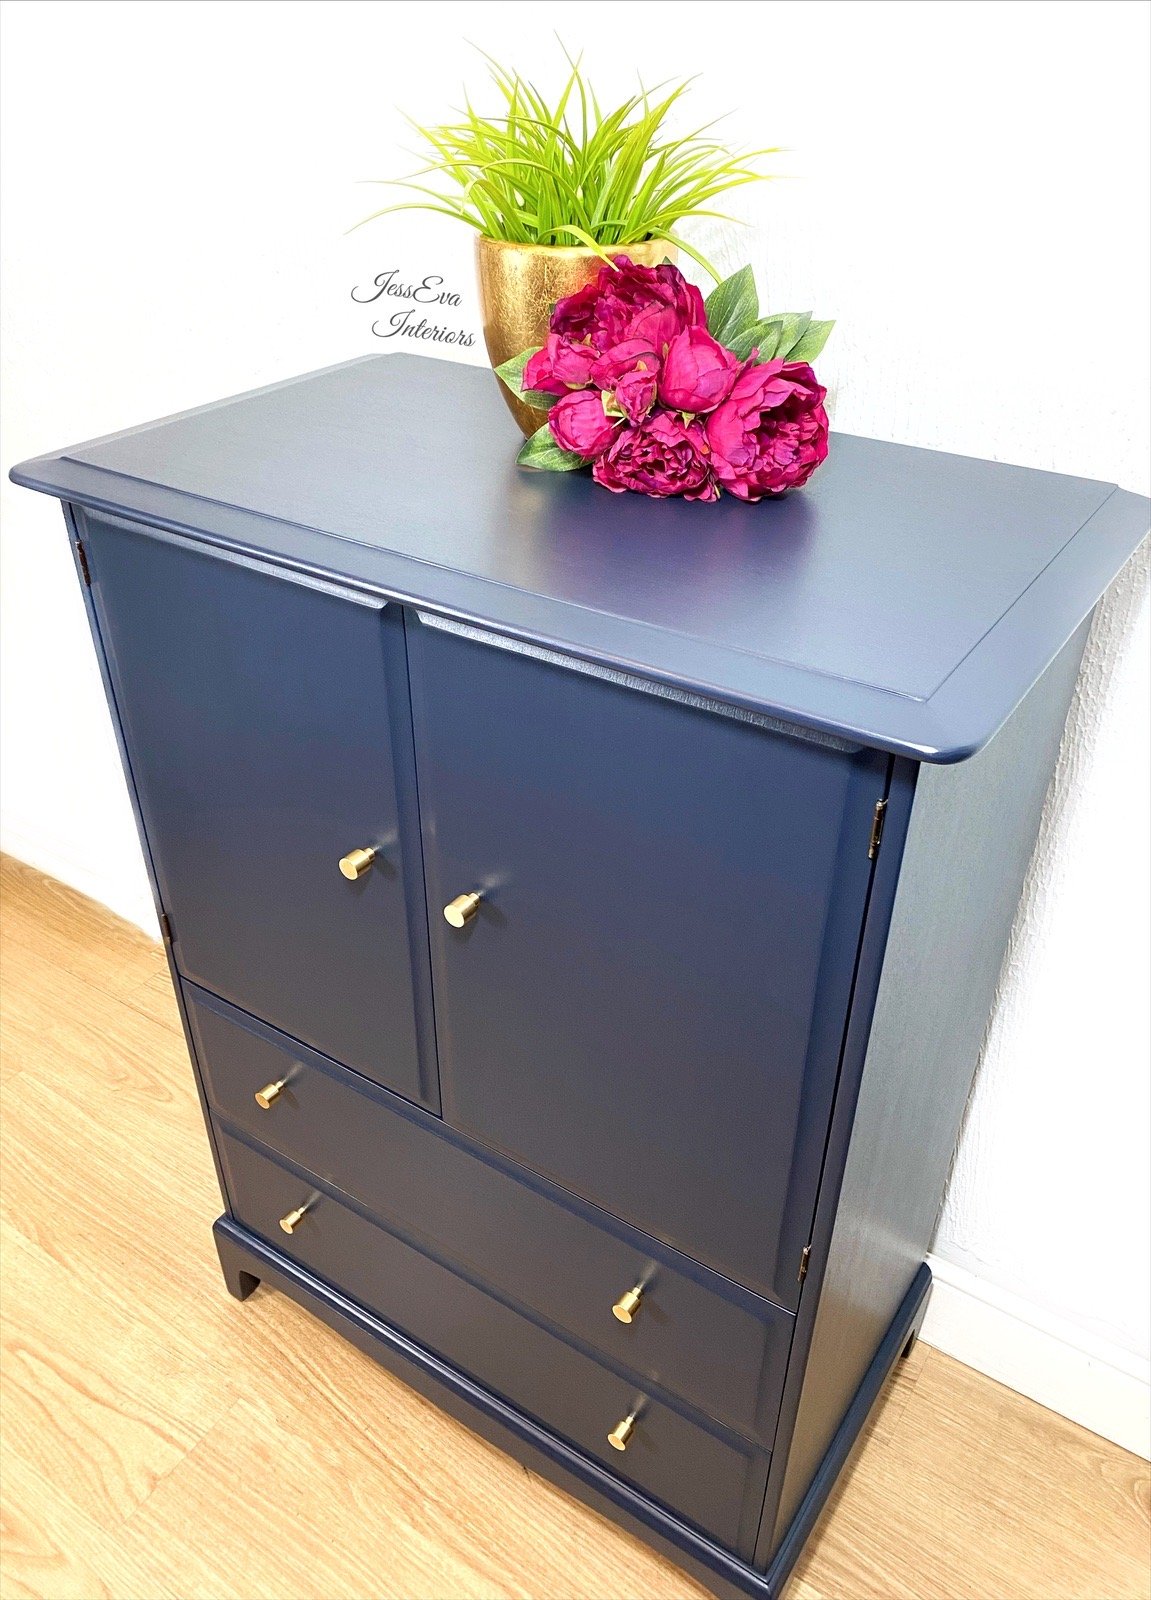 Painted Navy Blue Stag Minstrel LINEN CUPBOARD/ TALLBOY / DRINKS CABINET 